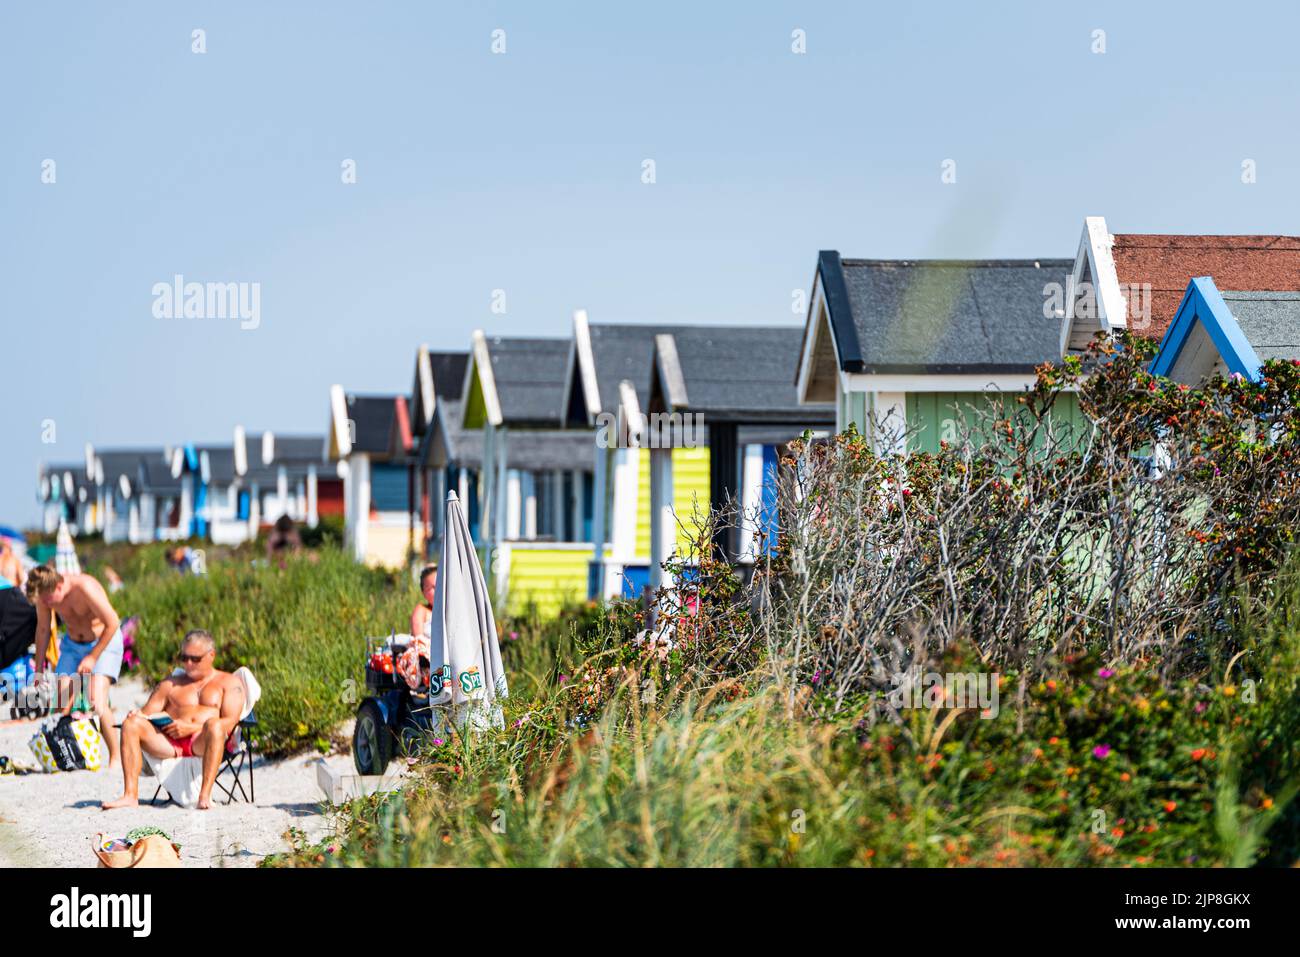 Skanor beach on a hot summer day with its typical Swedish summerhouses. Row of summer houses on a sandy Scandinavian beach with people getting tan Stock Photo